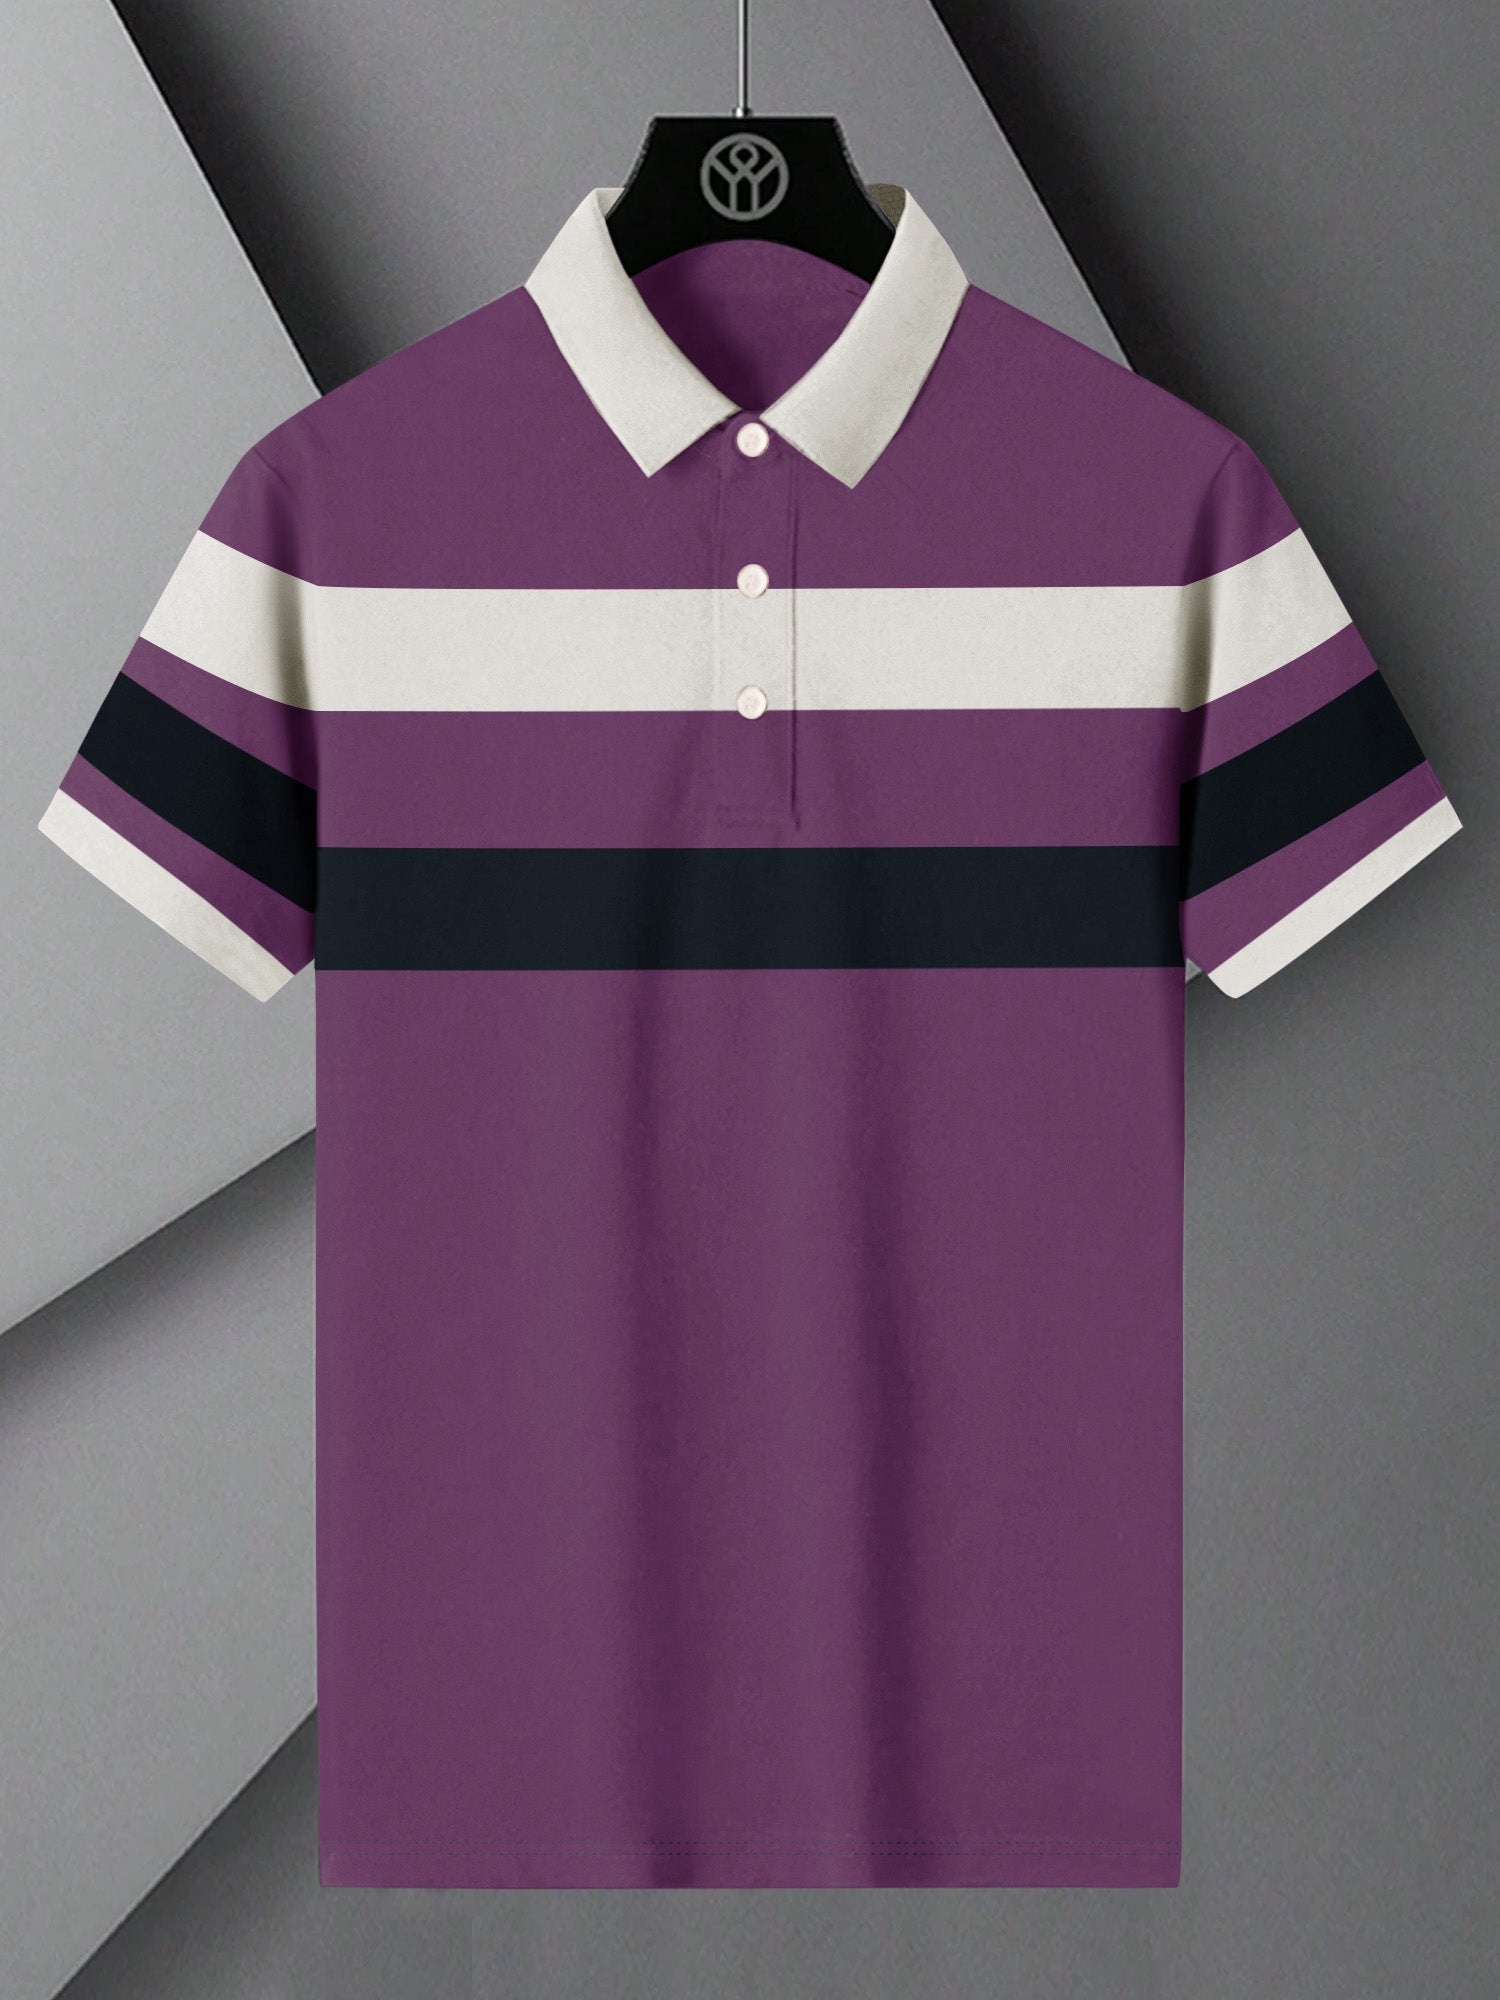 NXT Summer Polo Shirt For Men-Purple with Navy & White Stripe-BE723/BR12975